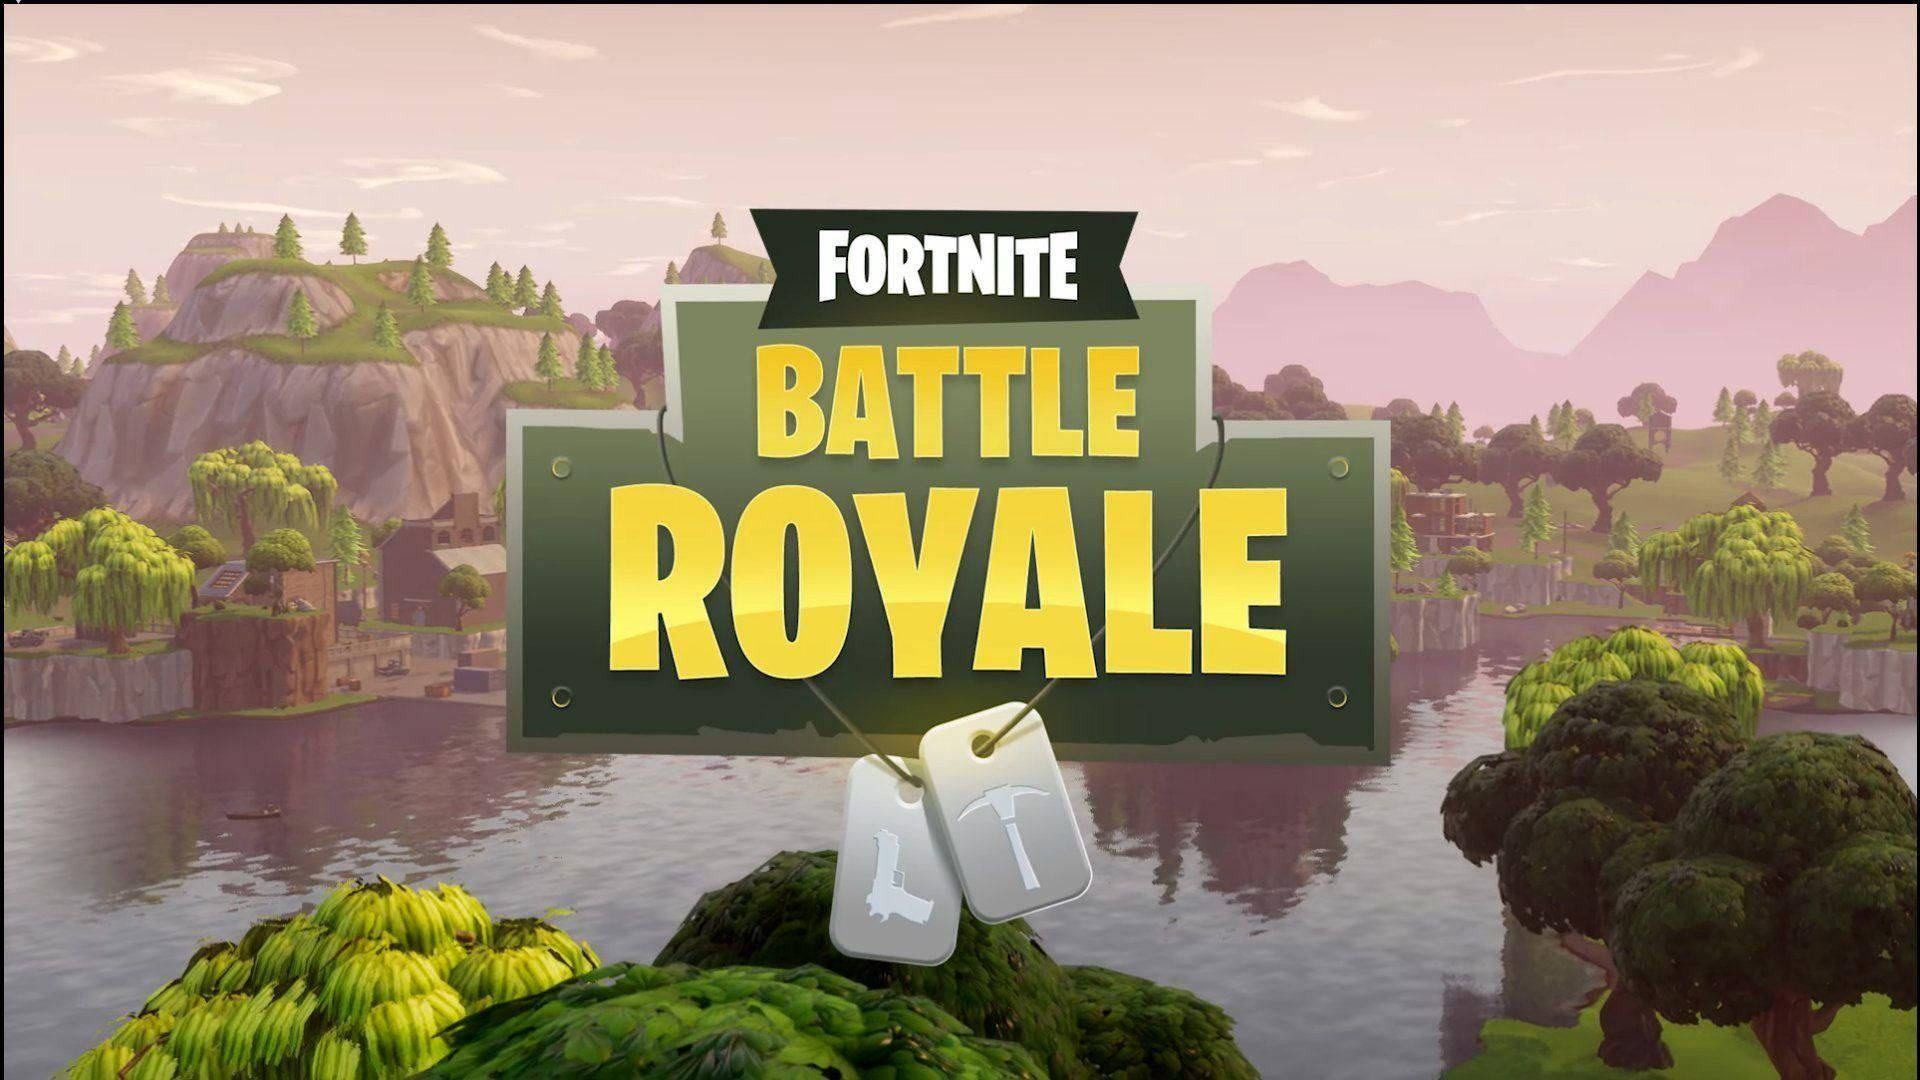 Fortnite Battle Royale game screen with lake and trees HD wallpaper.